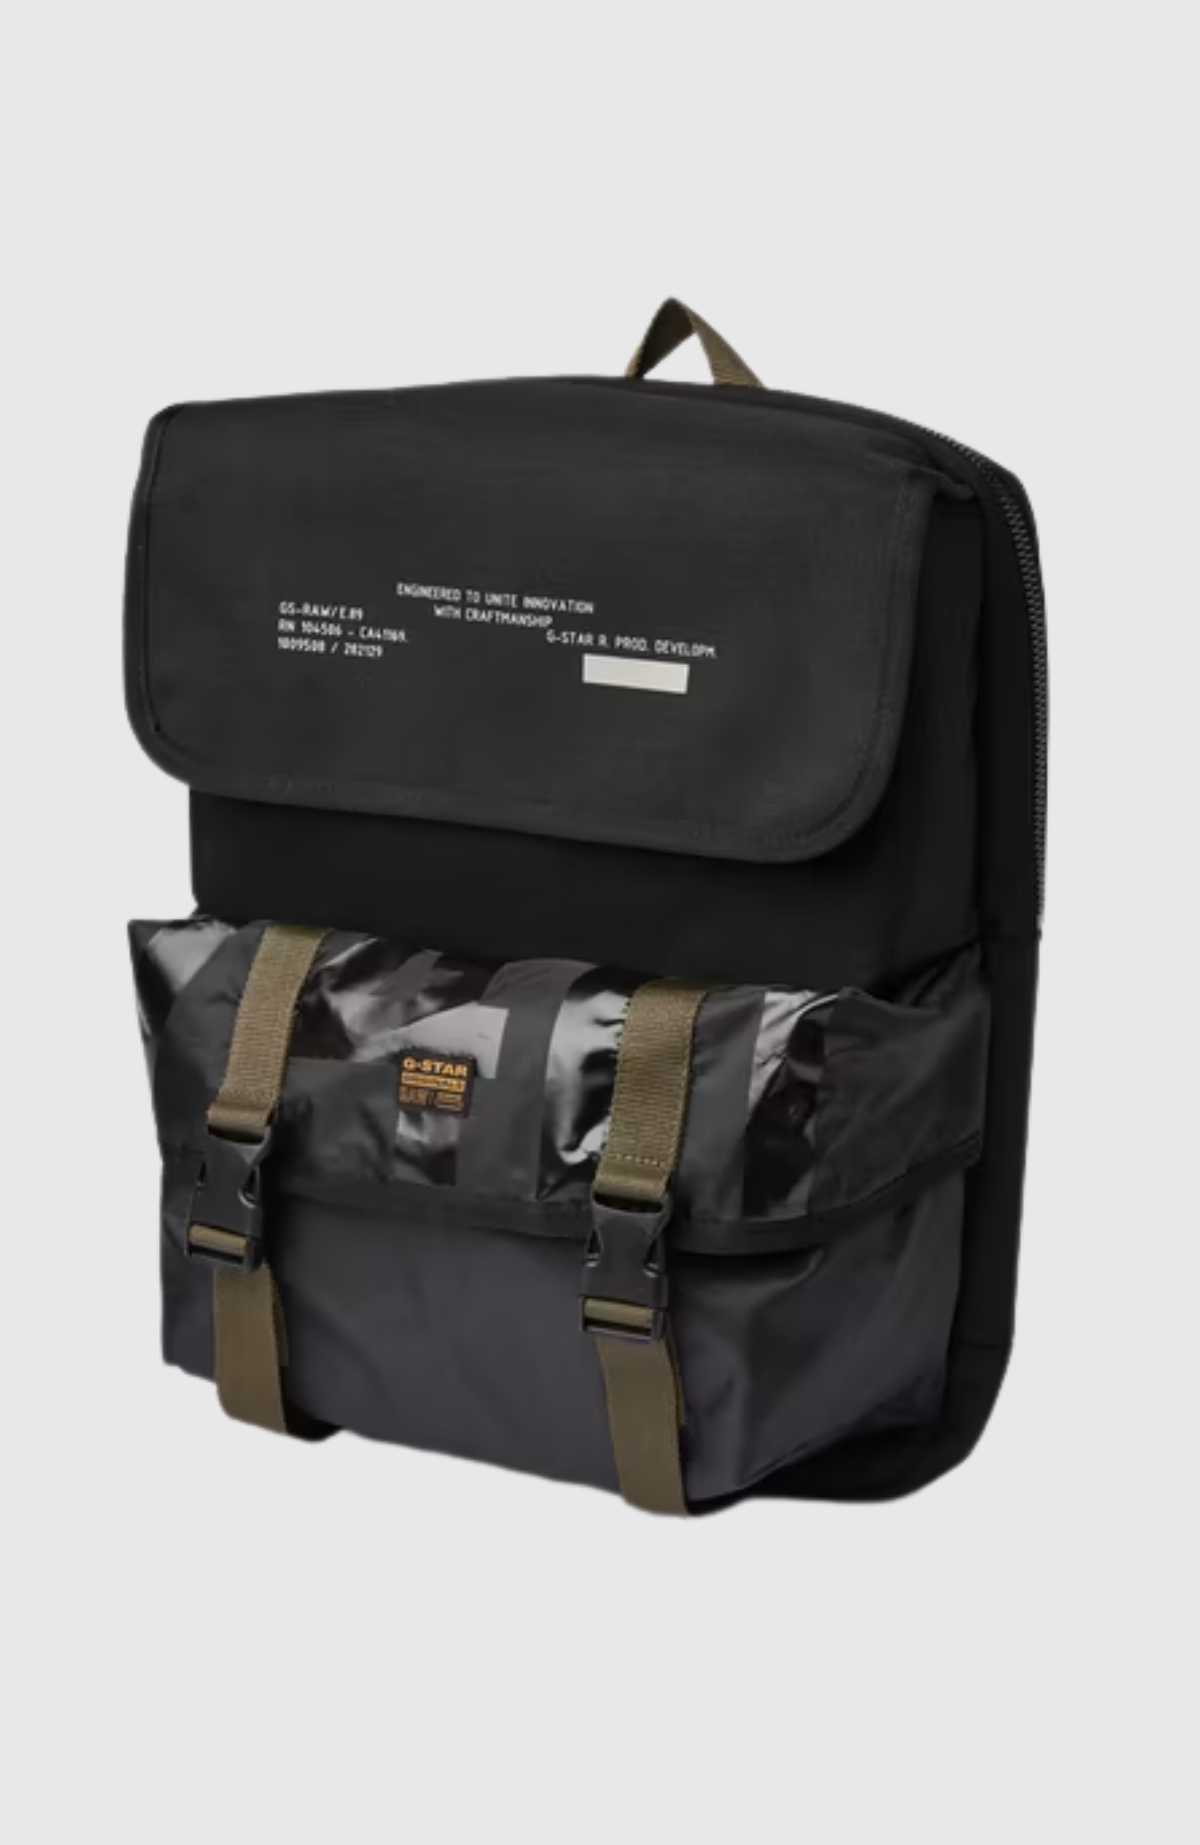 Components Backpack